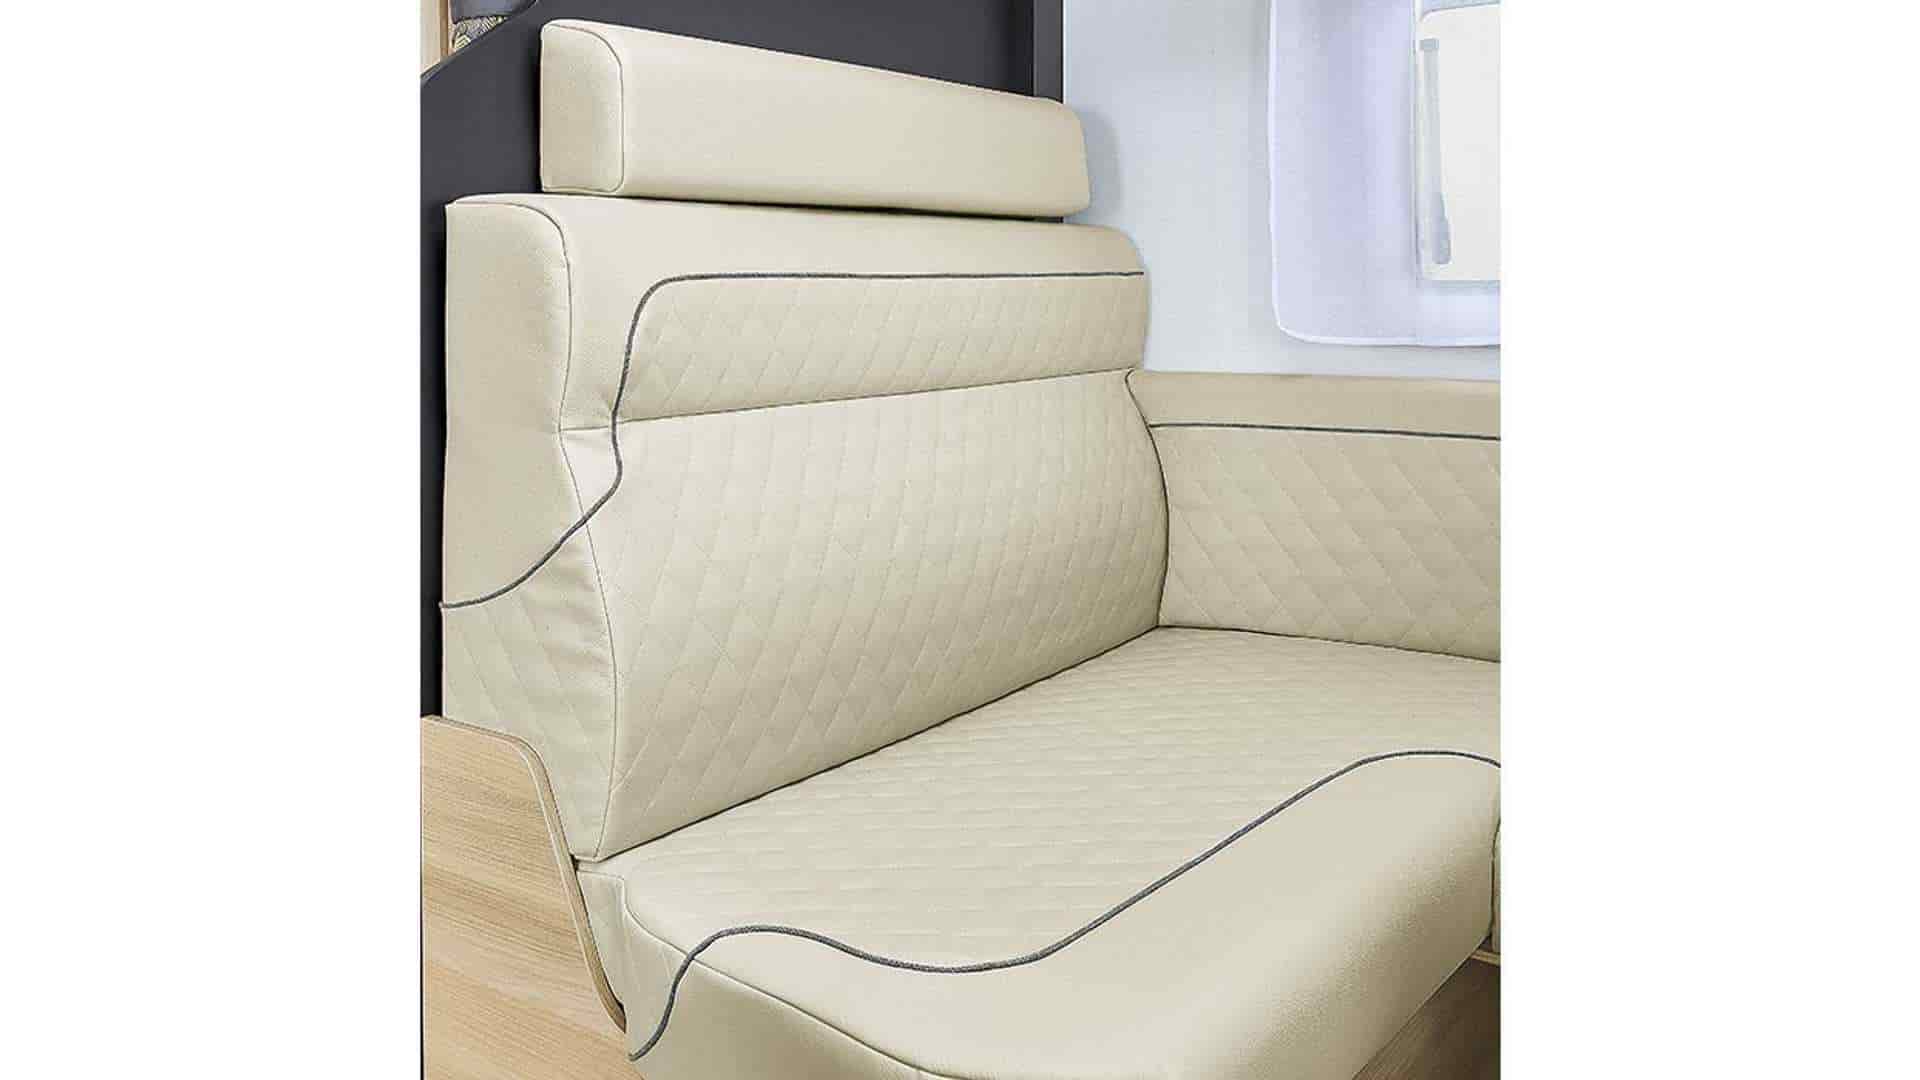 itineo nomad cm660 motorhome chair